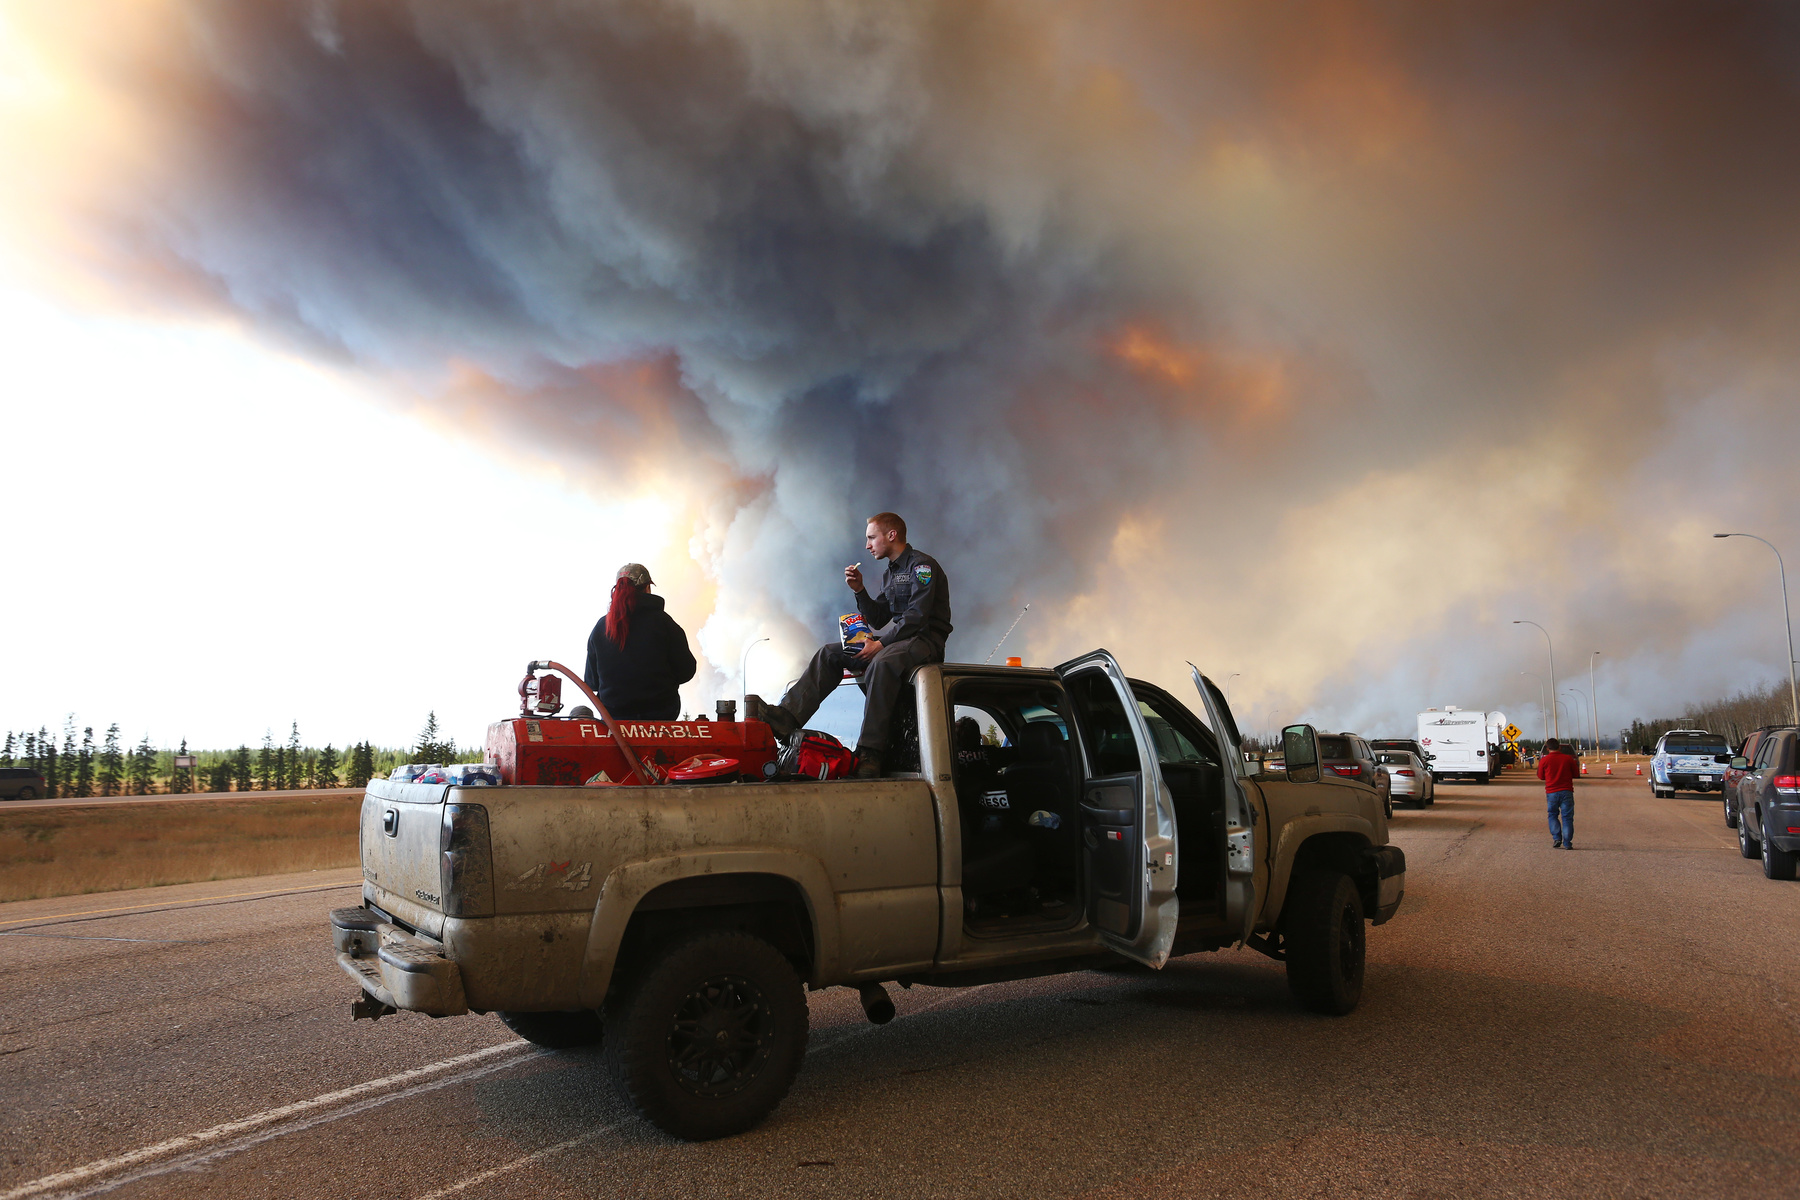  A group trying to rescue animals from Fort McMurray wait at road block on Highway 63 near Fort McMurray, Alberta on May 6, 2016 as smoke billows into the sky from raging forest fires. Photo: Cole Burston